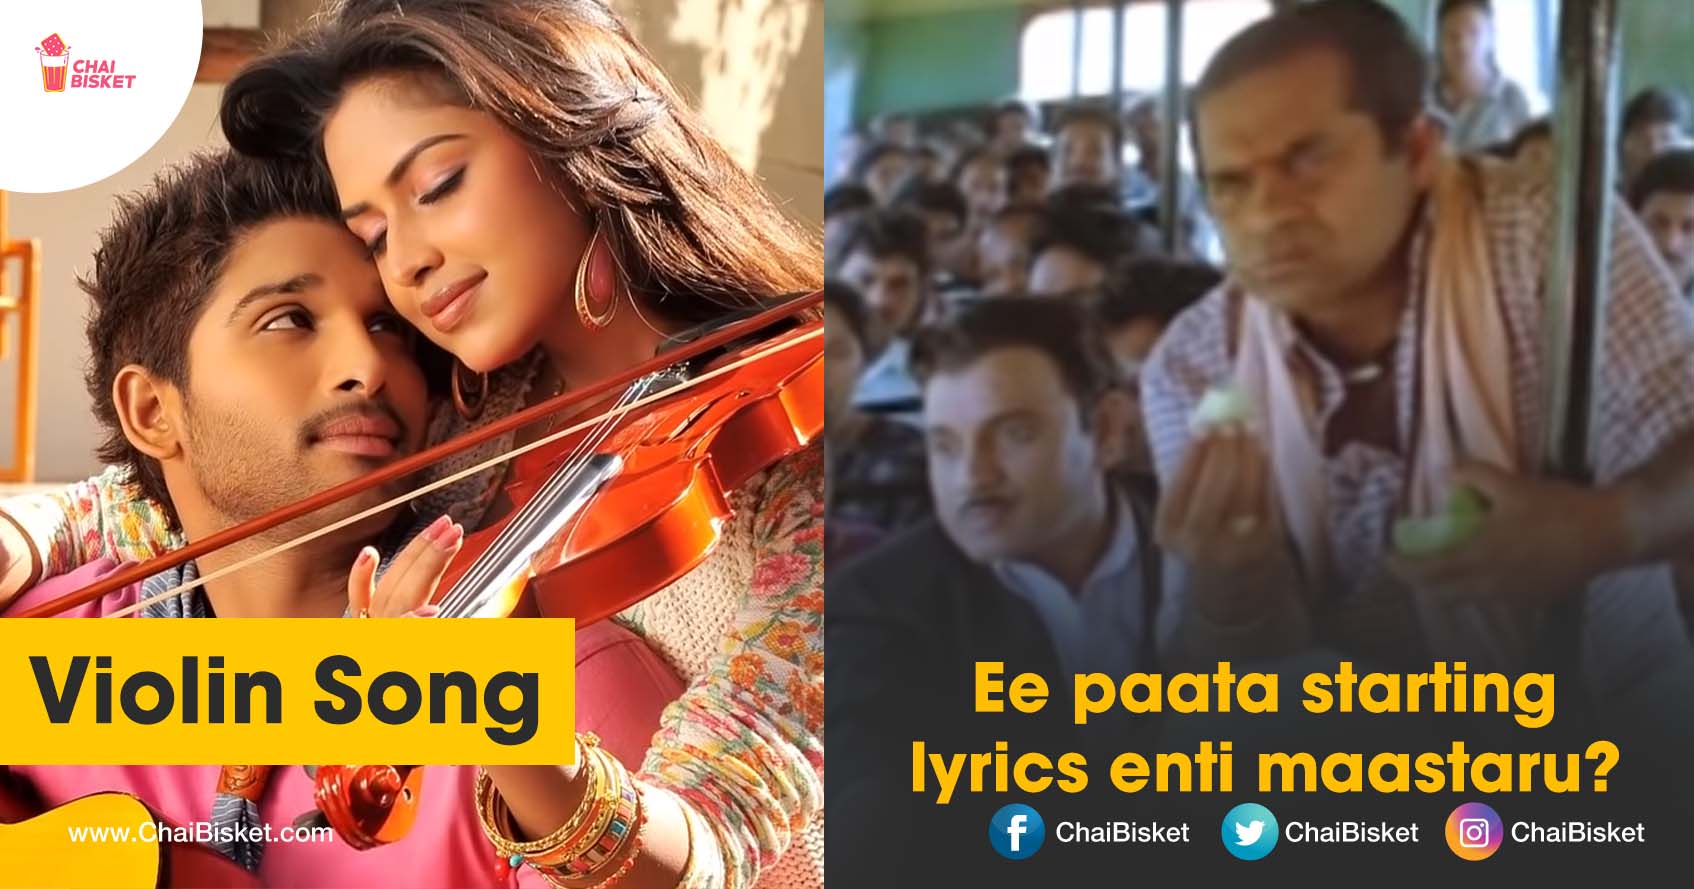 Our Favorite Songs With Theliyani Startings But Thelisina Hook Points